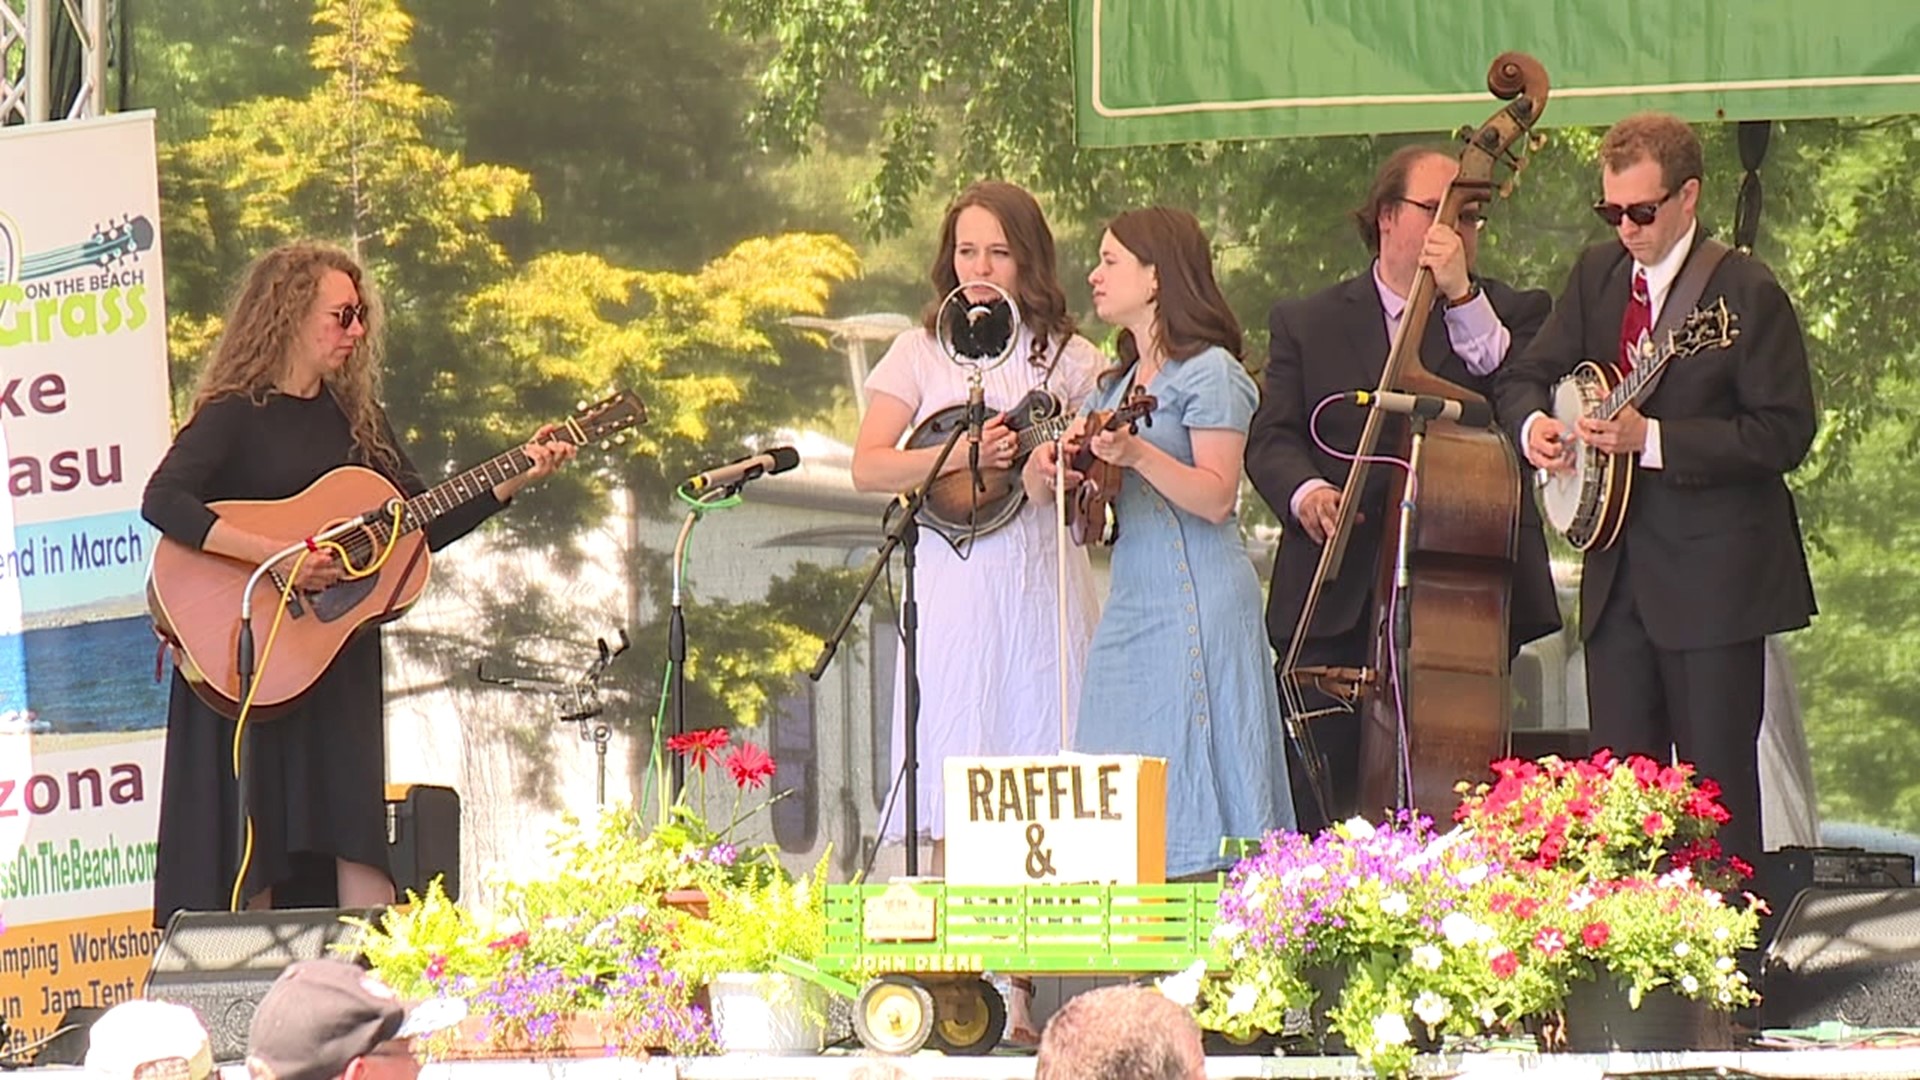 It's a picture-perfect weekend for a music festival at LazyBrook Park near Tunkhannock on Saturday.